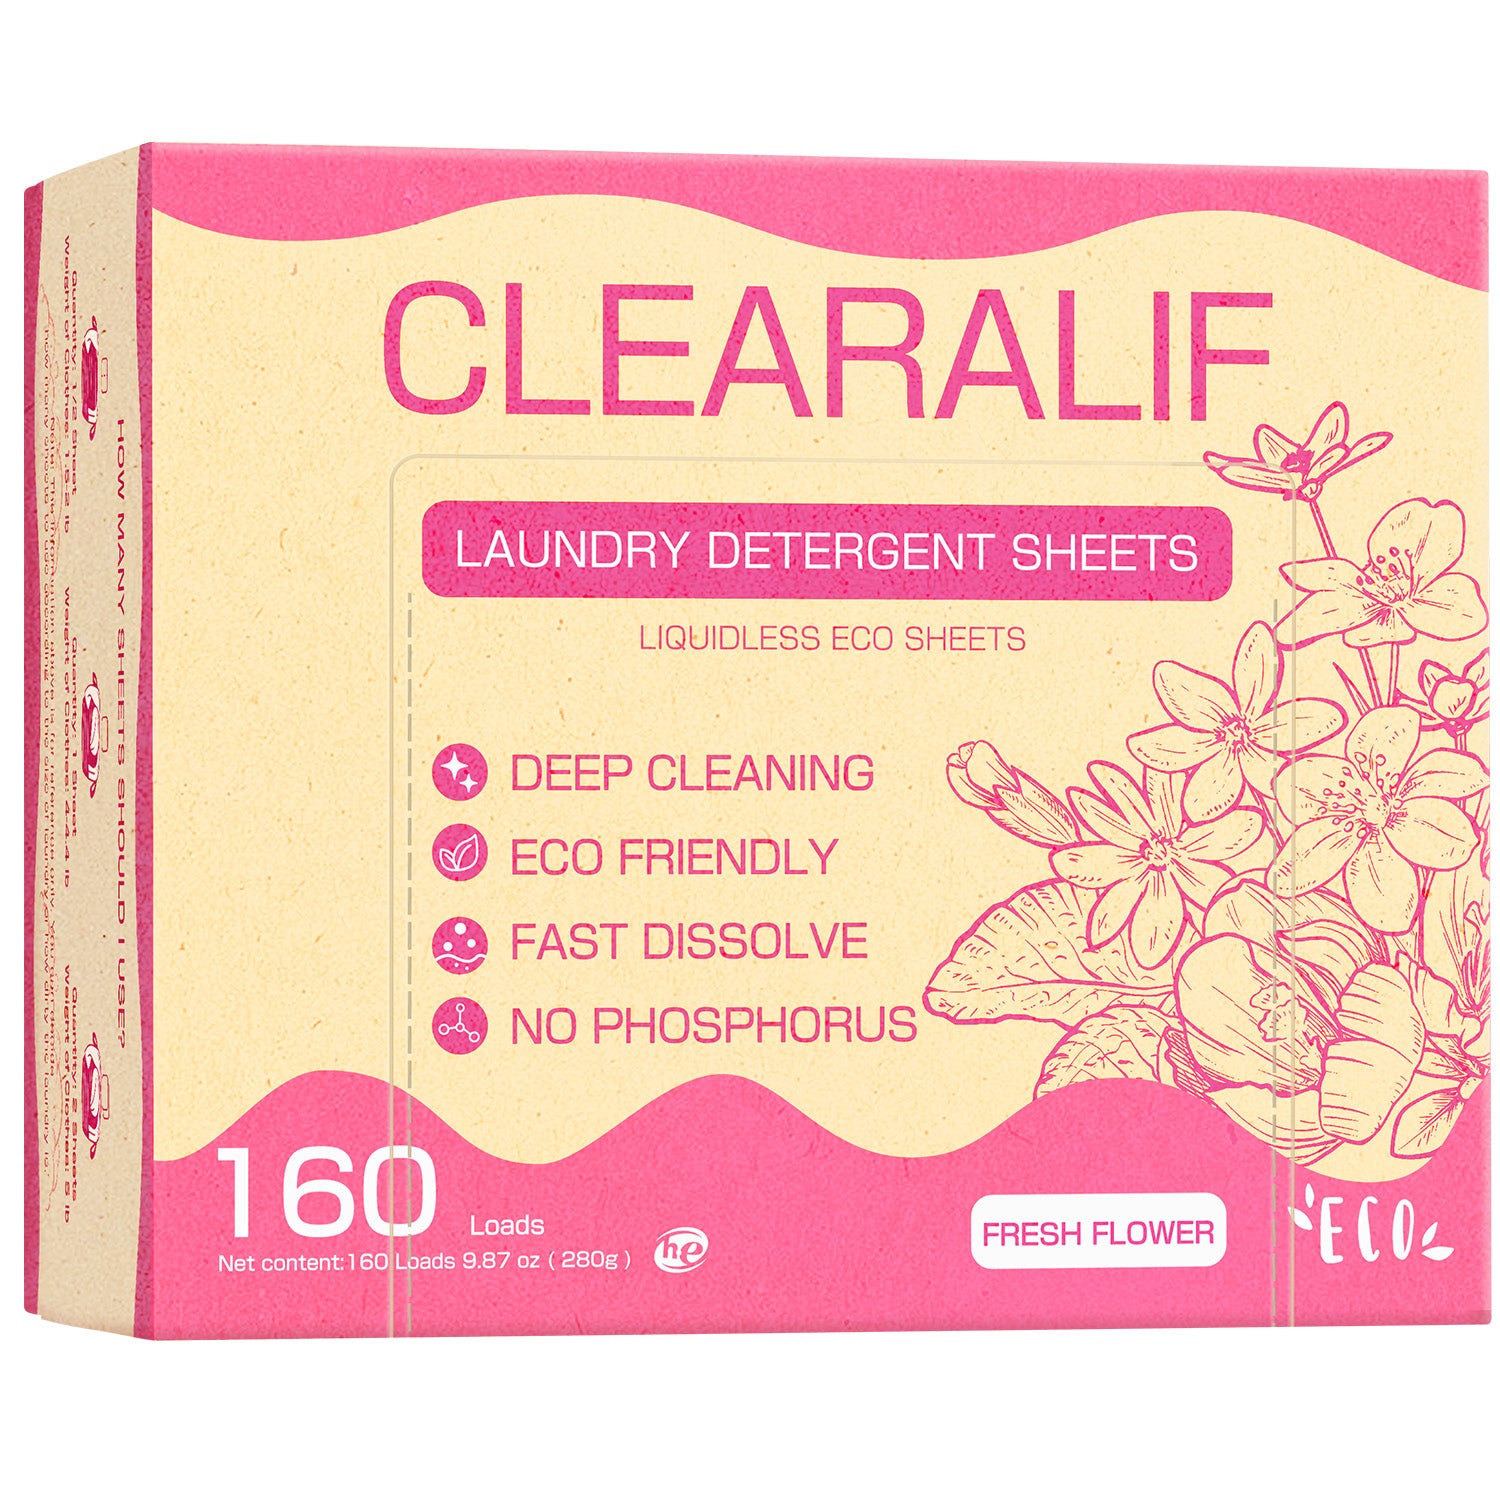 Clearalif Eco Laundry Detergent Sheets